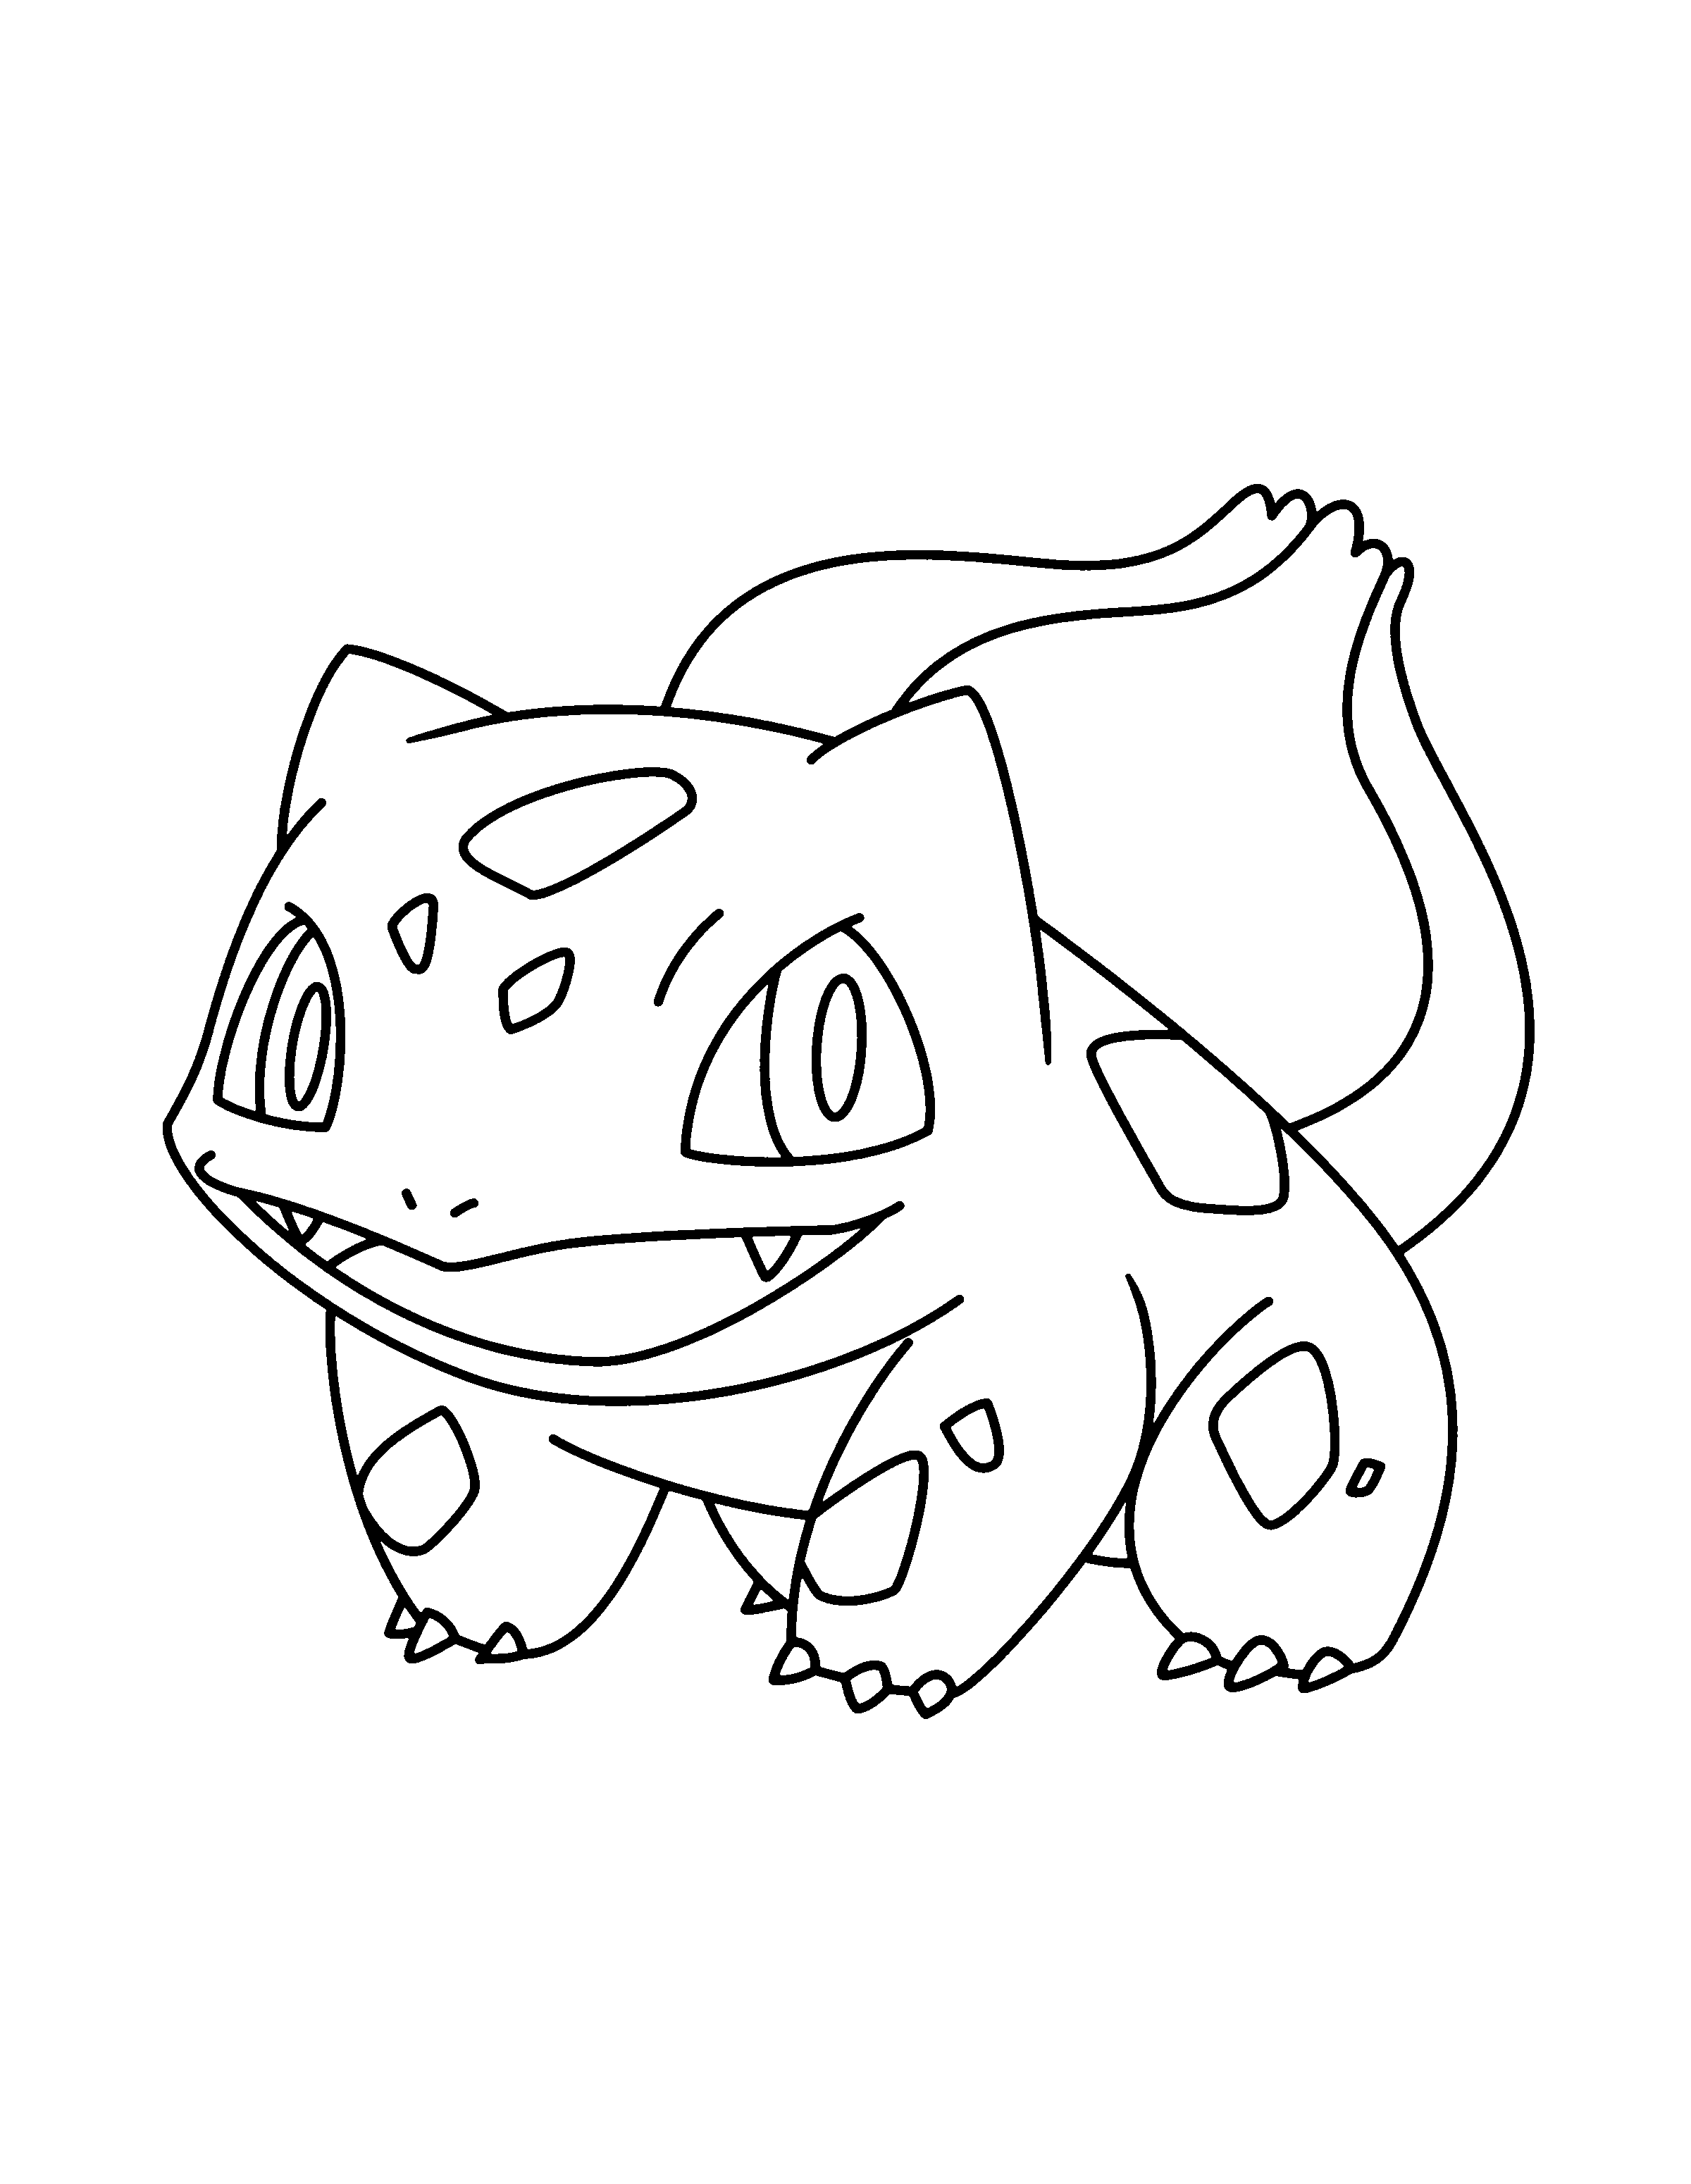 animated-coloring-pages-pokemon-image-0909